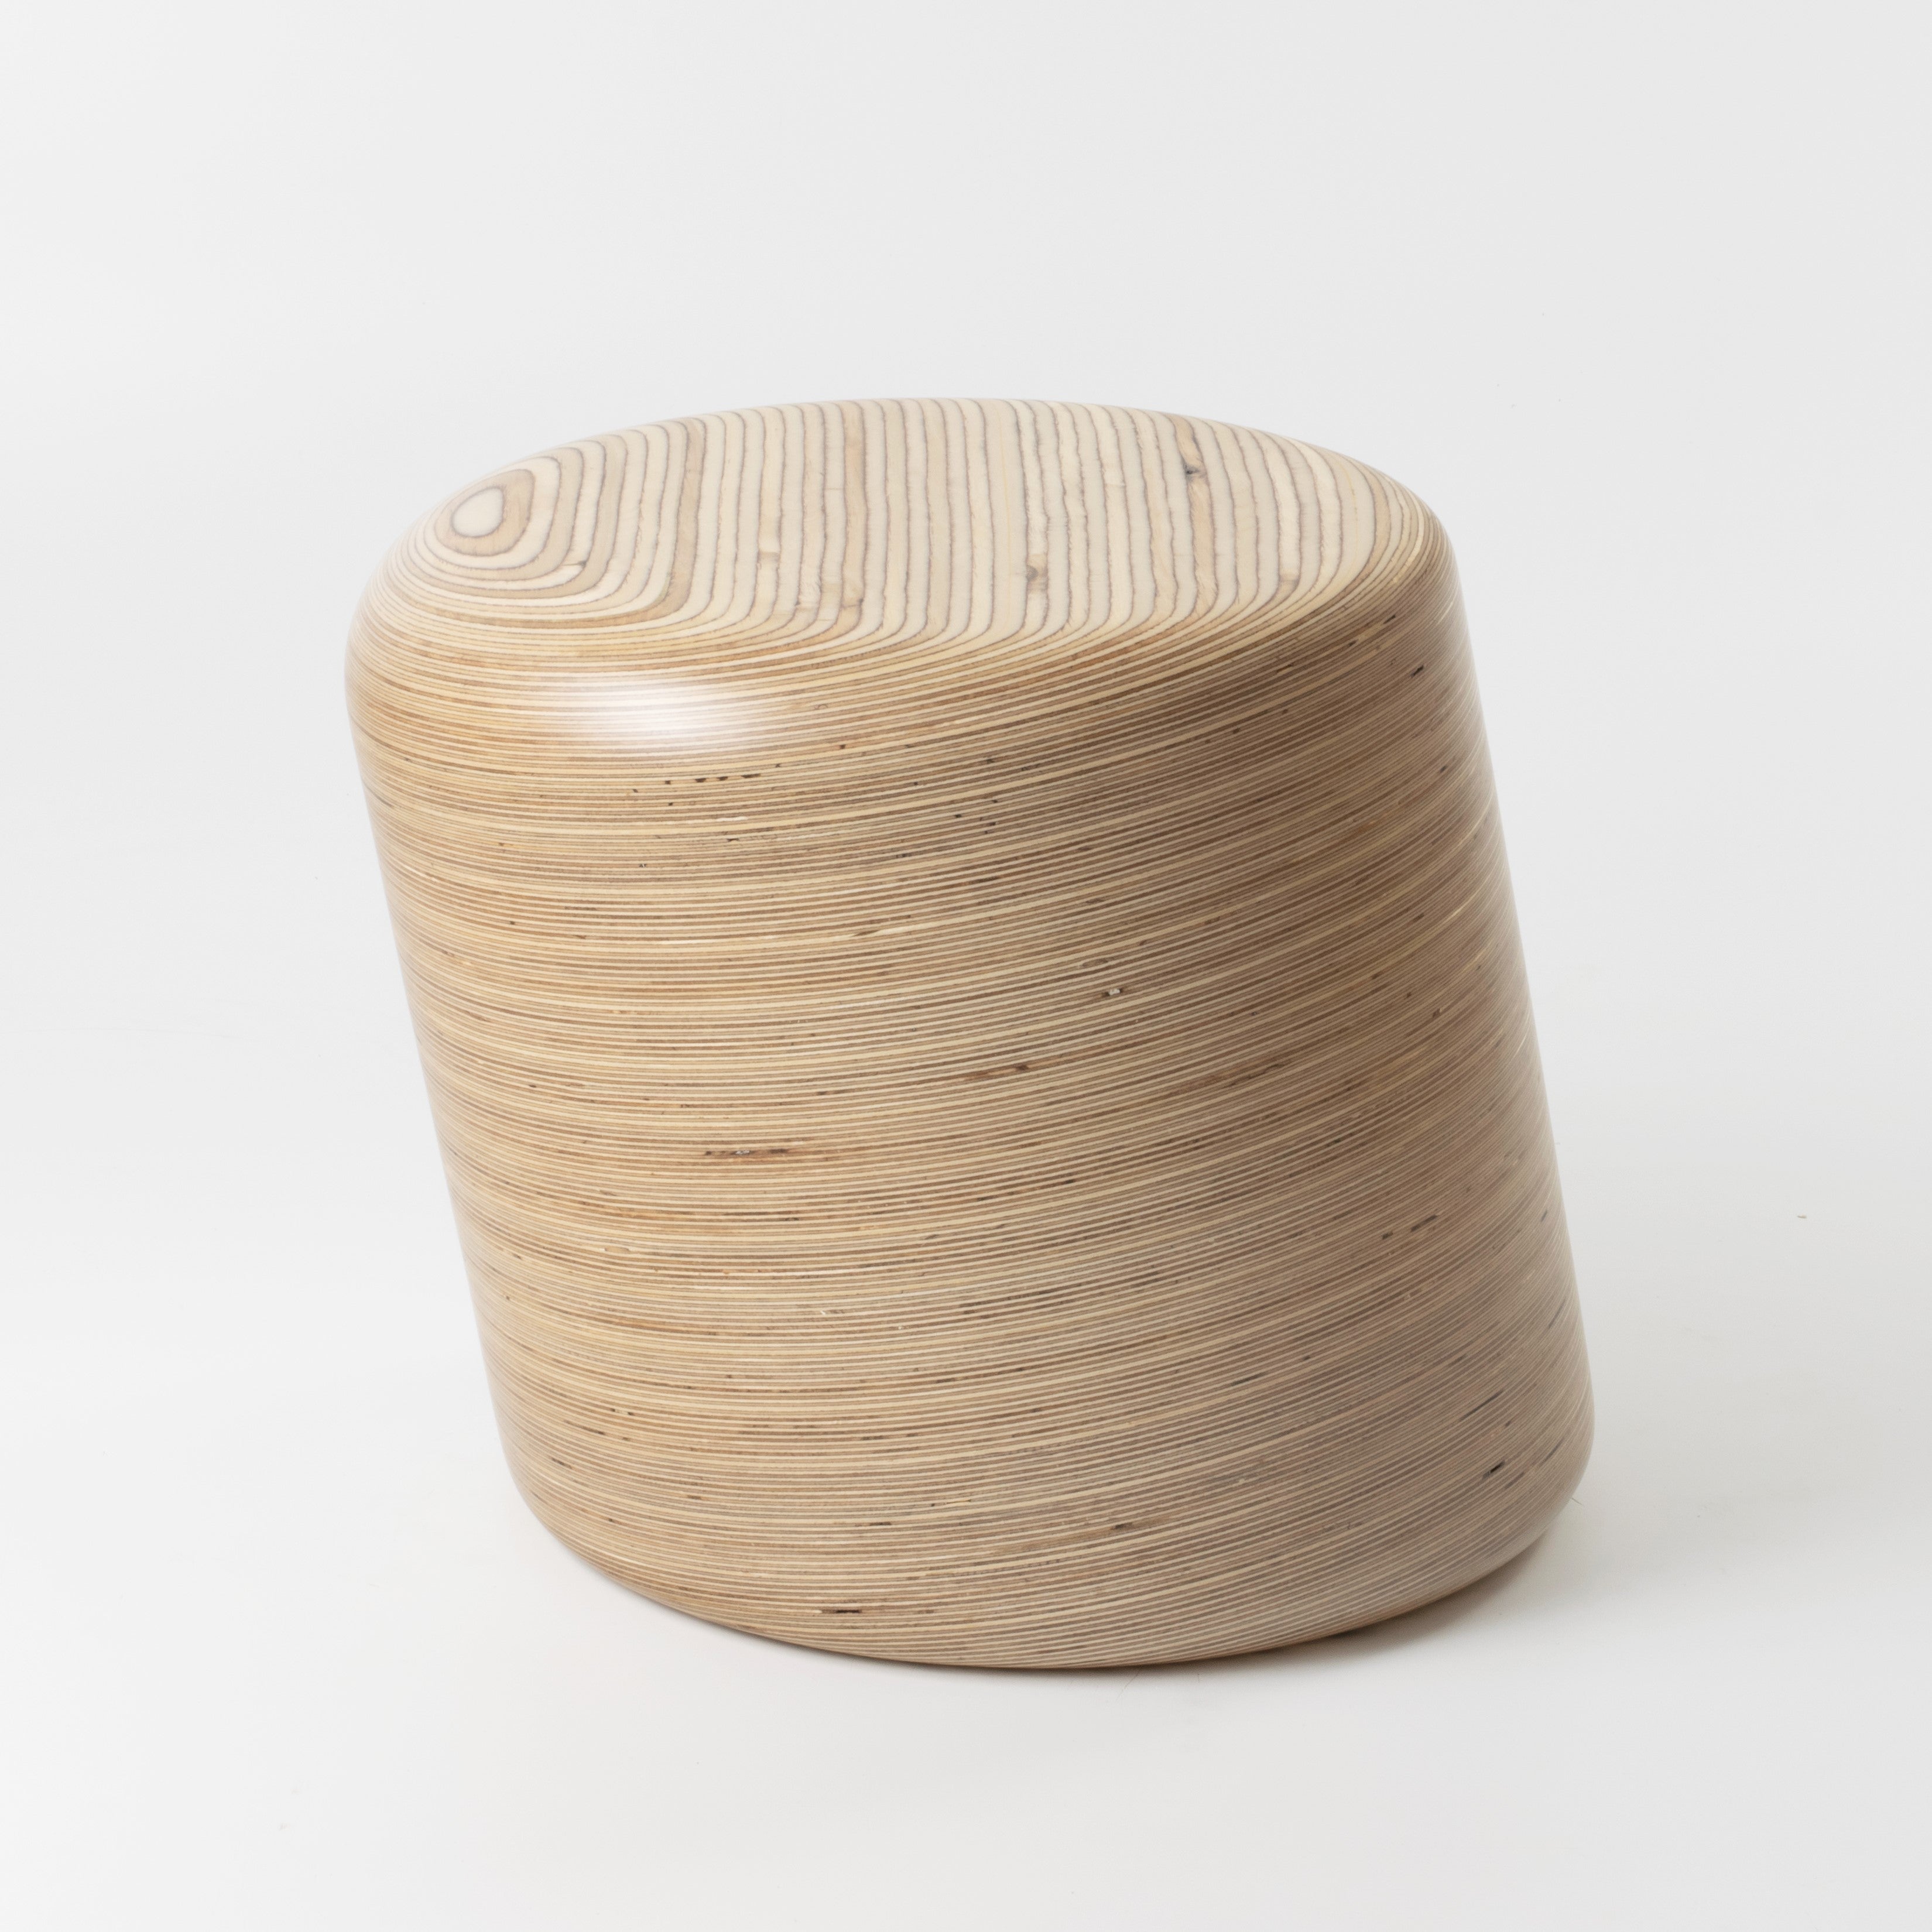 Birch plywood stack stool by design and fabrication studio Timbur. Represented by Tuleste Factory in New York City.